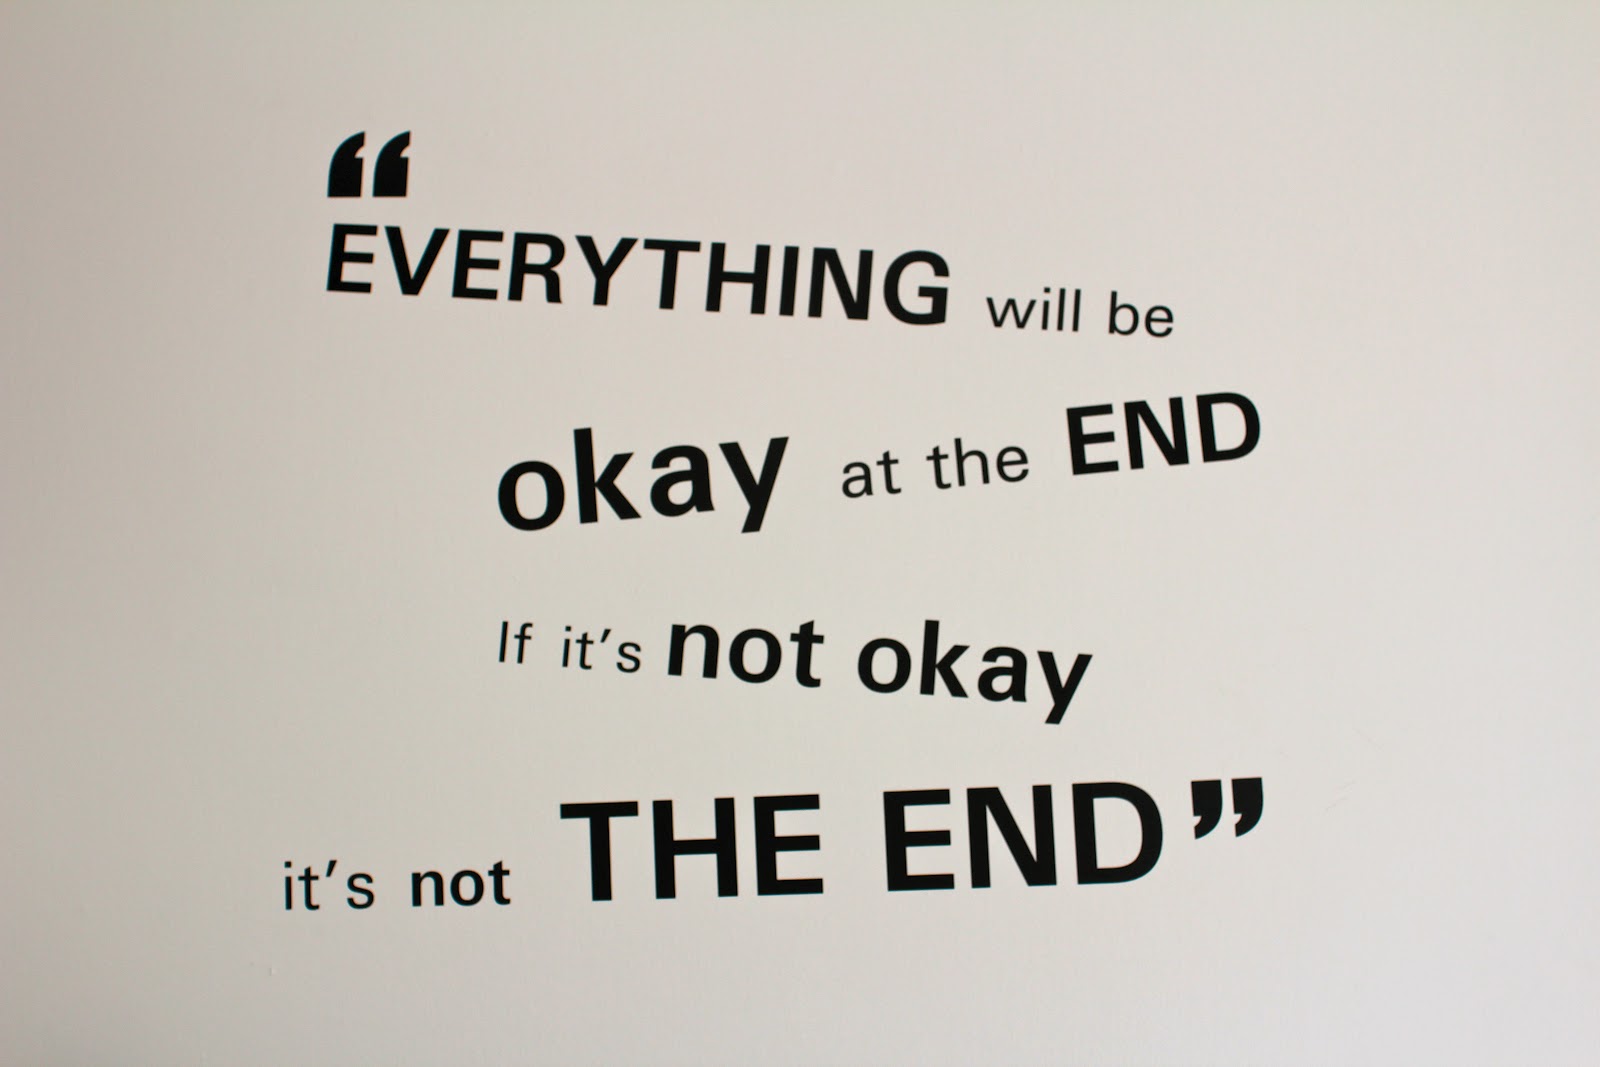 In the end на русском. At the end in the end разница. Everything will be okay. Not the end. Everything is okay.